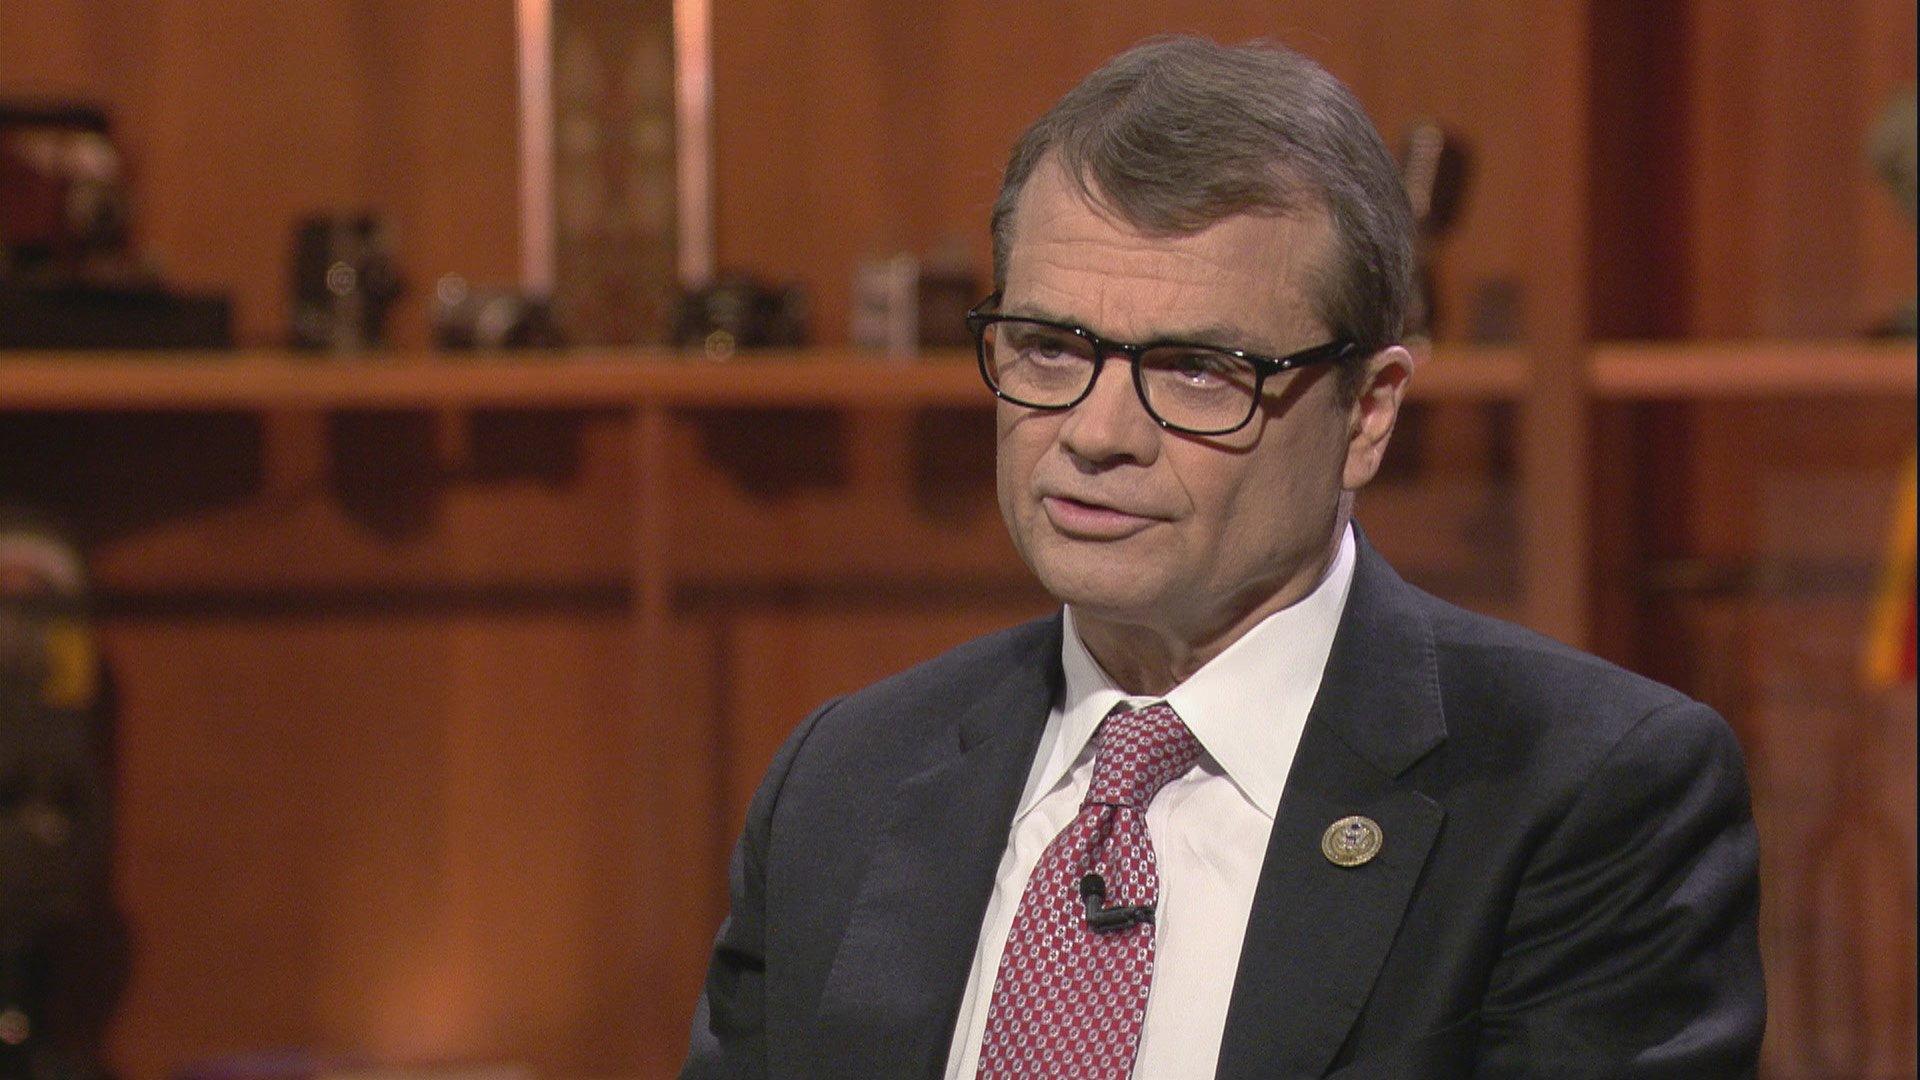 U.S. Rep. Mike Quigley appears on “Chicago Tonight” on Nov. 25, 2019. (WTTW News)